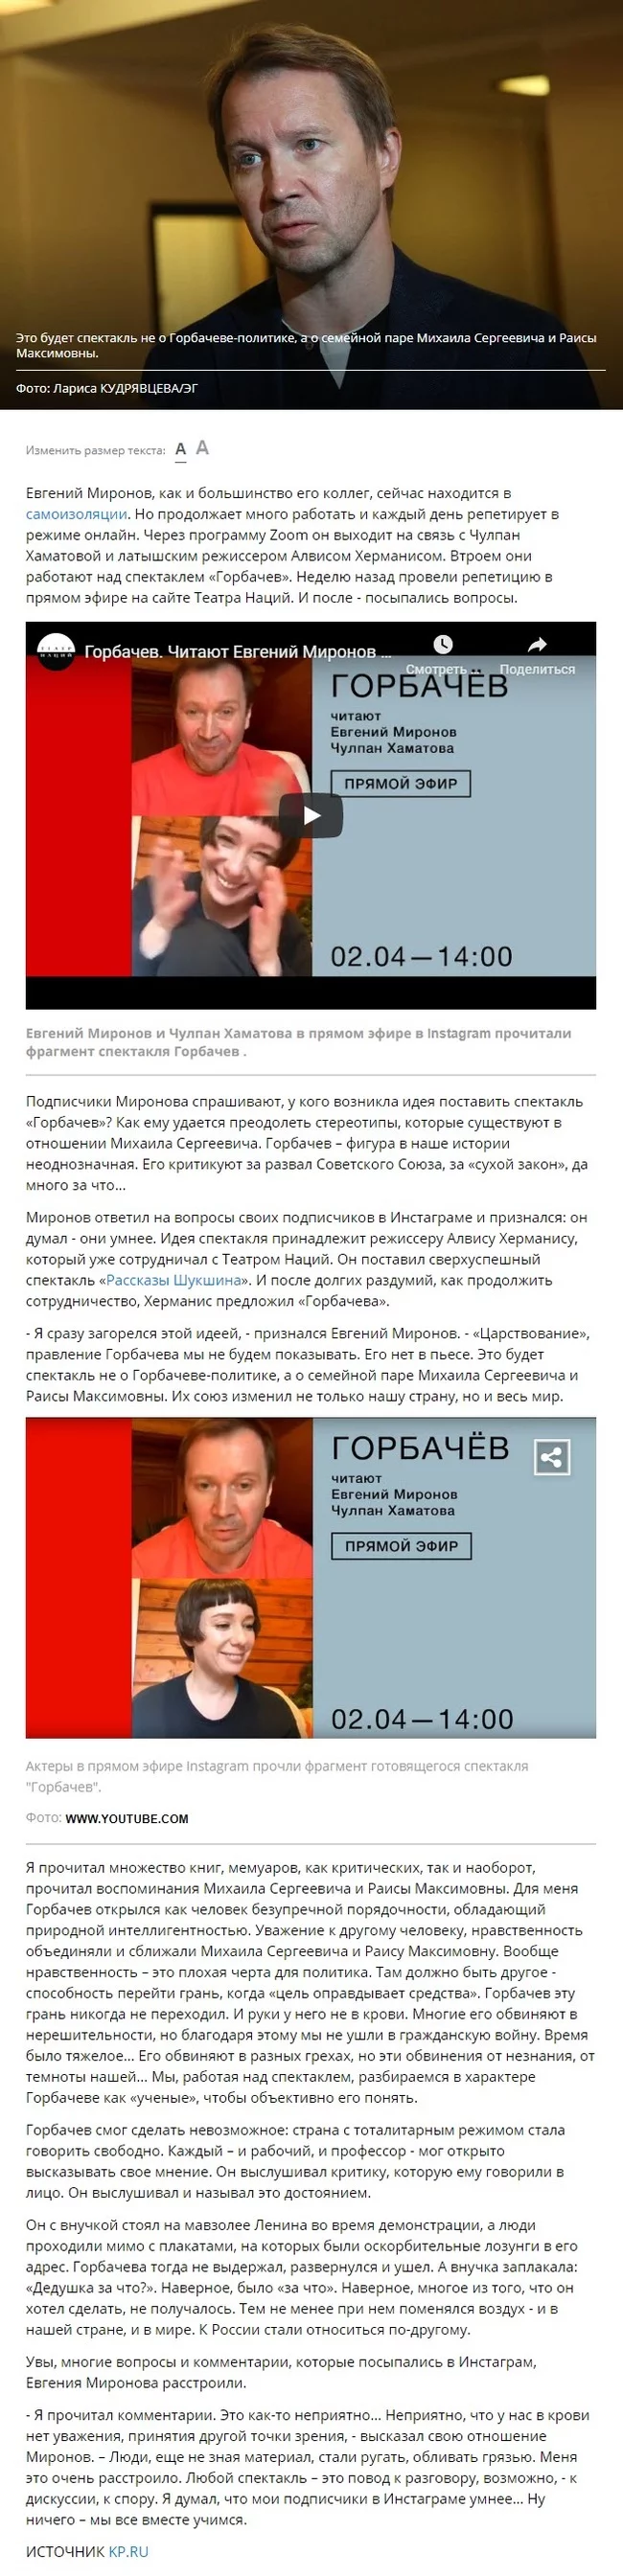 Evgeny Mironov: “Mikhail Gorbachev is being reviled due to darkness and ignorance” - Politics, Mikhail Gorbachev, Chulpan Khamatova, Longpost, Evgeny Mironov